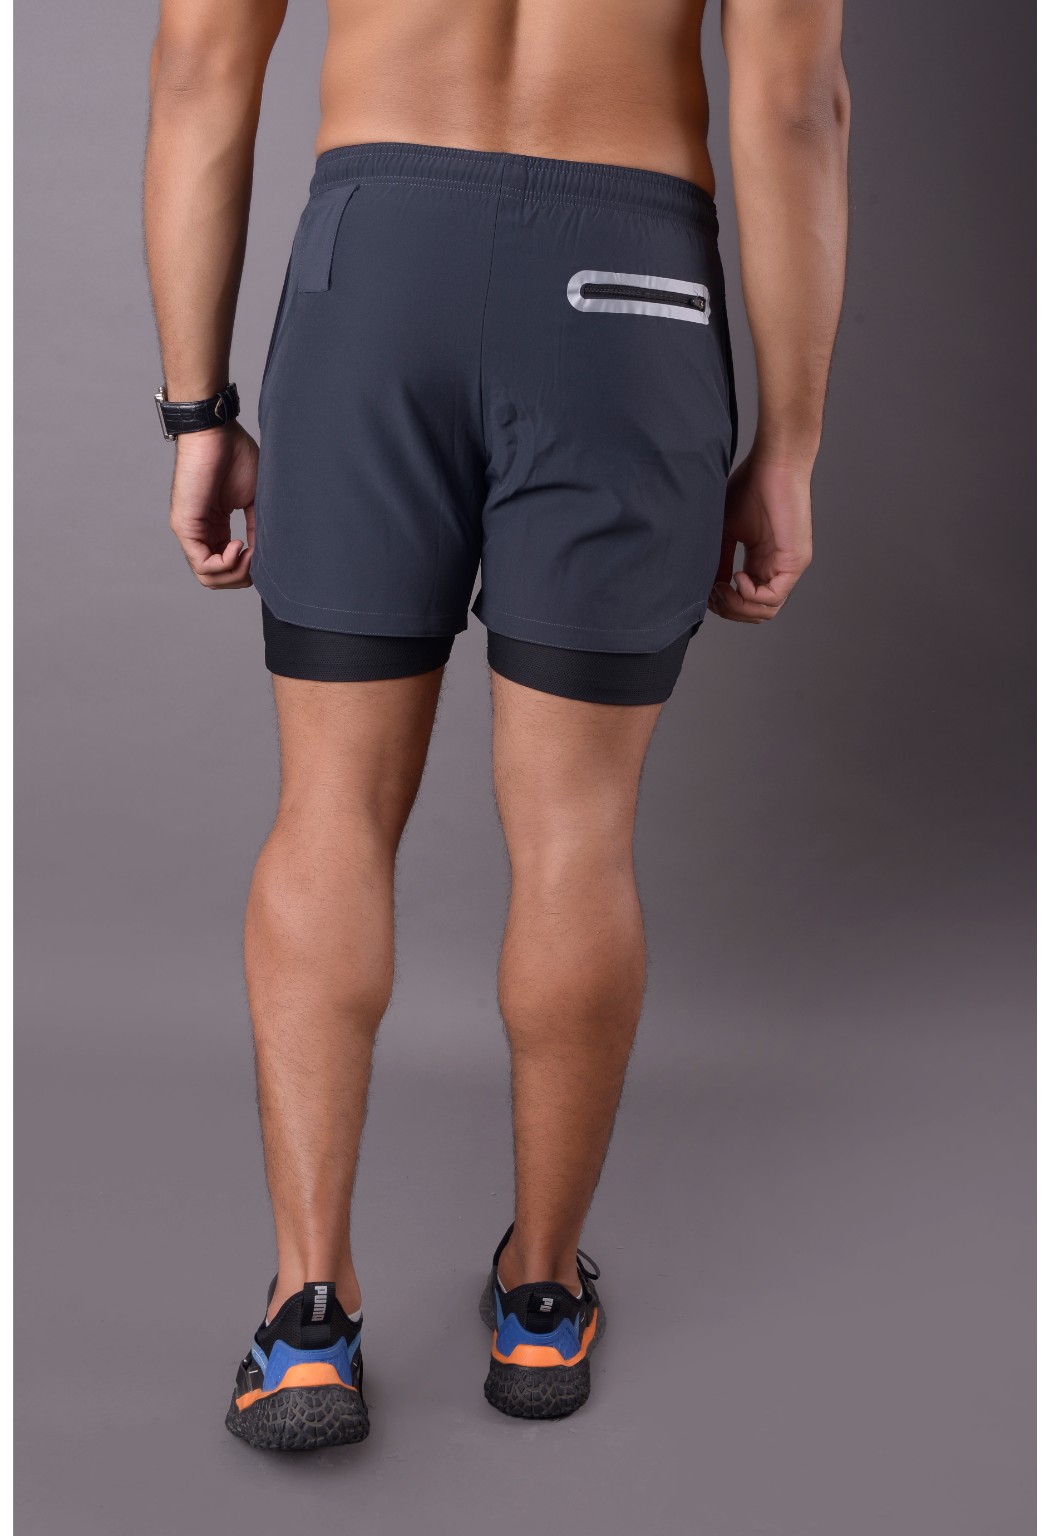 Limitless 2-IN-1 Shorts – Black & Grey – Fitlethics